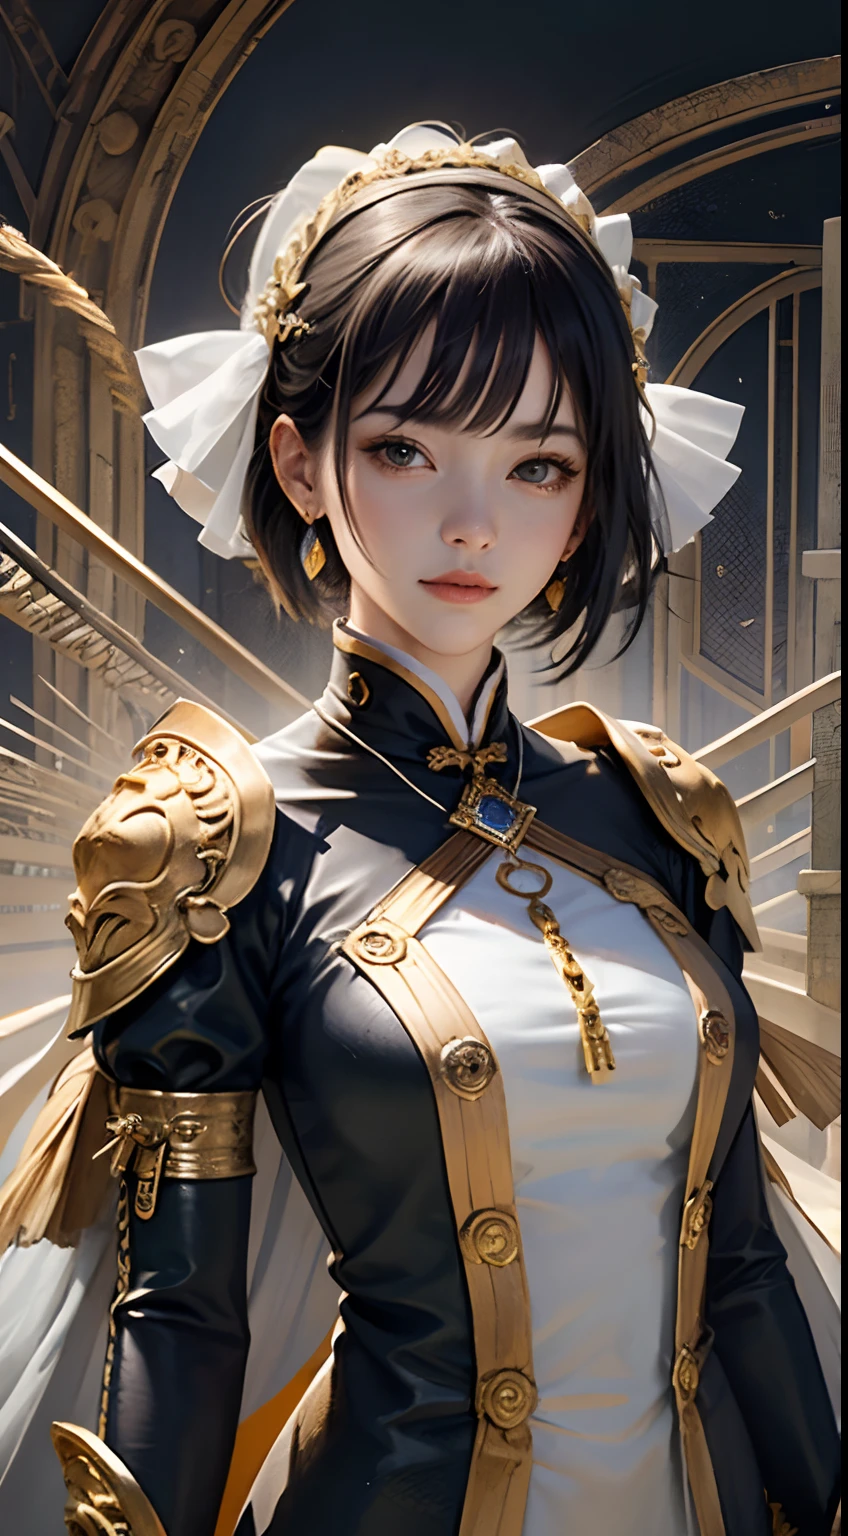 （tmasterpiece，top Quority，best qualtiy，offcial art，Beautiful and aesthetic：1.2），（1girl huge large breasts），waist - up，Tang suit，Hanfu，cyber punk style，mechs，Extremely detailed，Colorful，highestdetailed，offcial art，Unity 8k wallpaper，Ultra-detail，Beautiful and aesthetic，beatifull，tmasterpiece，best qualtiy，（zentangle，a Mandala，Tangles，Entangled），Sacred Radiance，gold foil，Gold leaf art，glitter drawing，PerfectNwsjMajic、a pixie cut